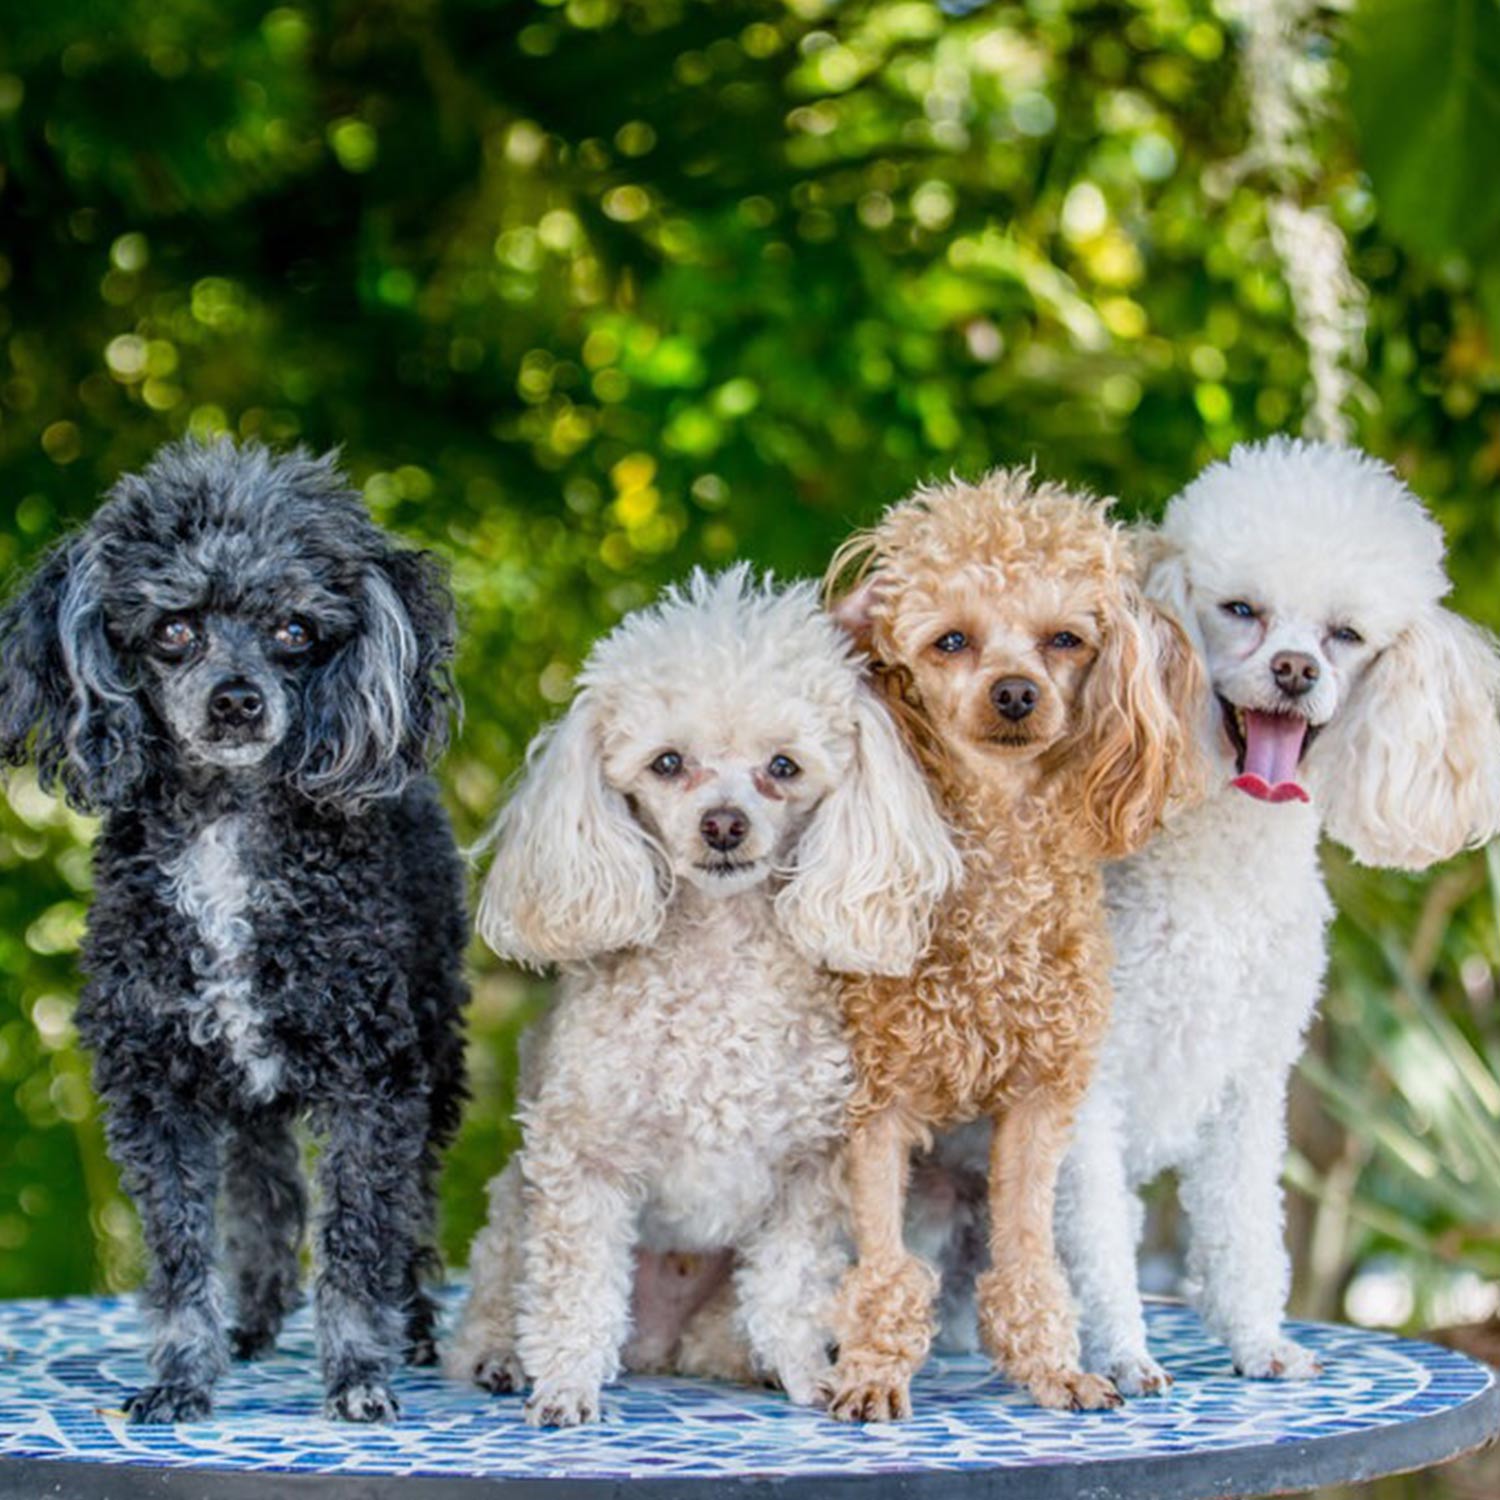 Sheila and eric n Emailed a picture of their family of four teacup poodles from left to right shaker martini margarita and salt More than one is always fun They live in venice fl